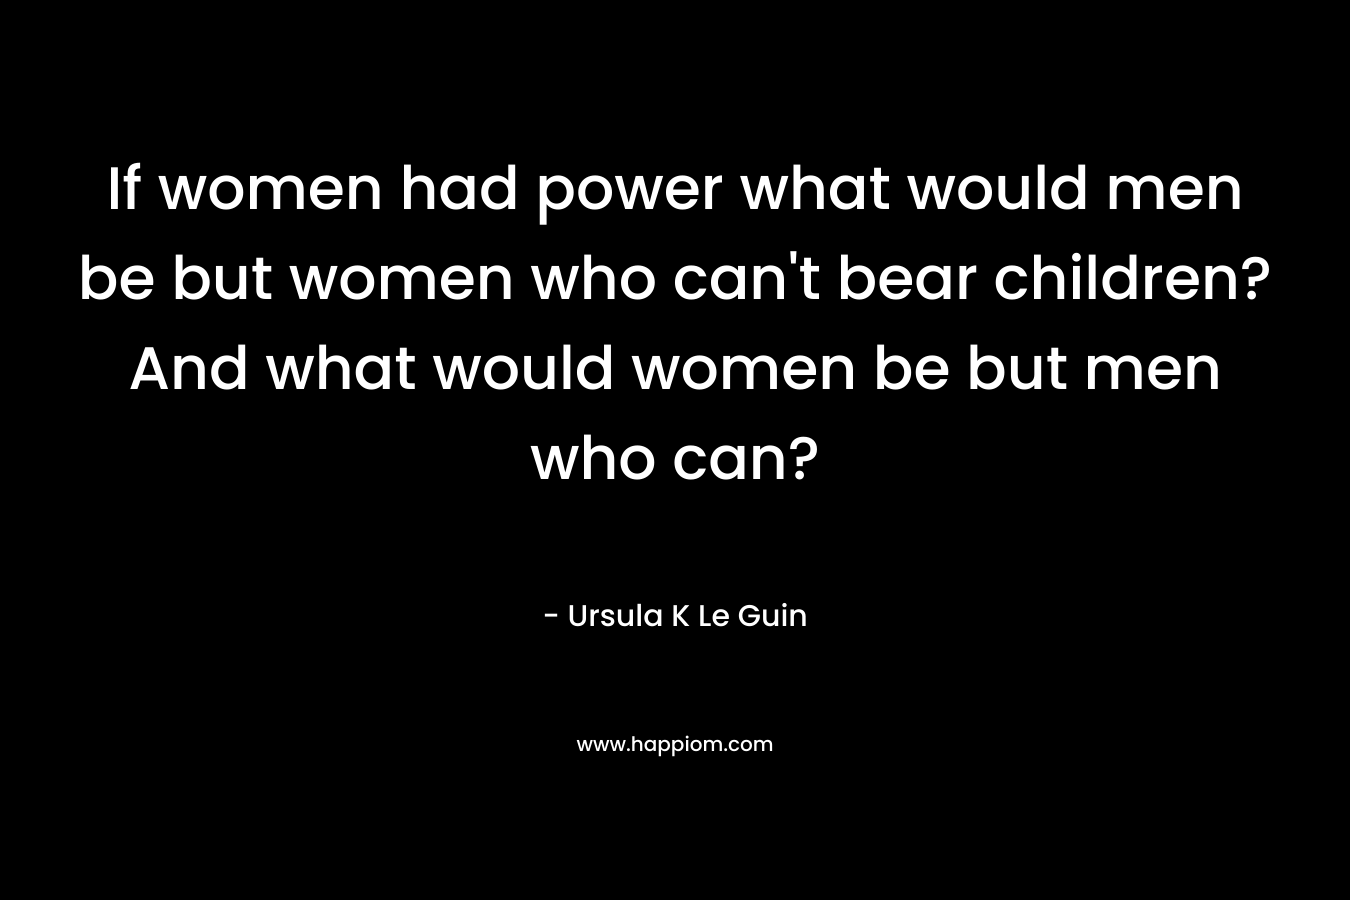 If women had power what would men be but women who can't bear children? And what would women be but men who can?